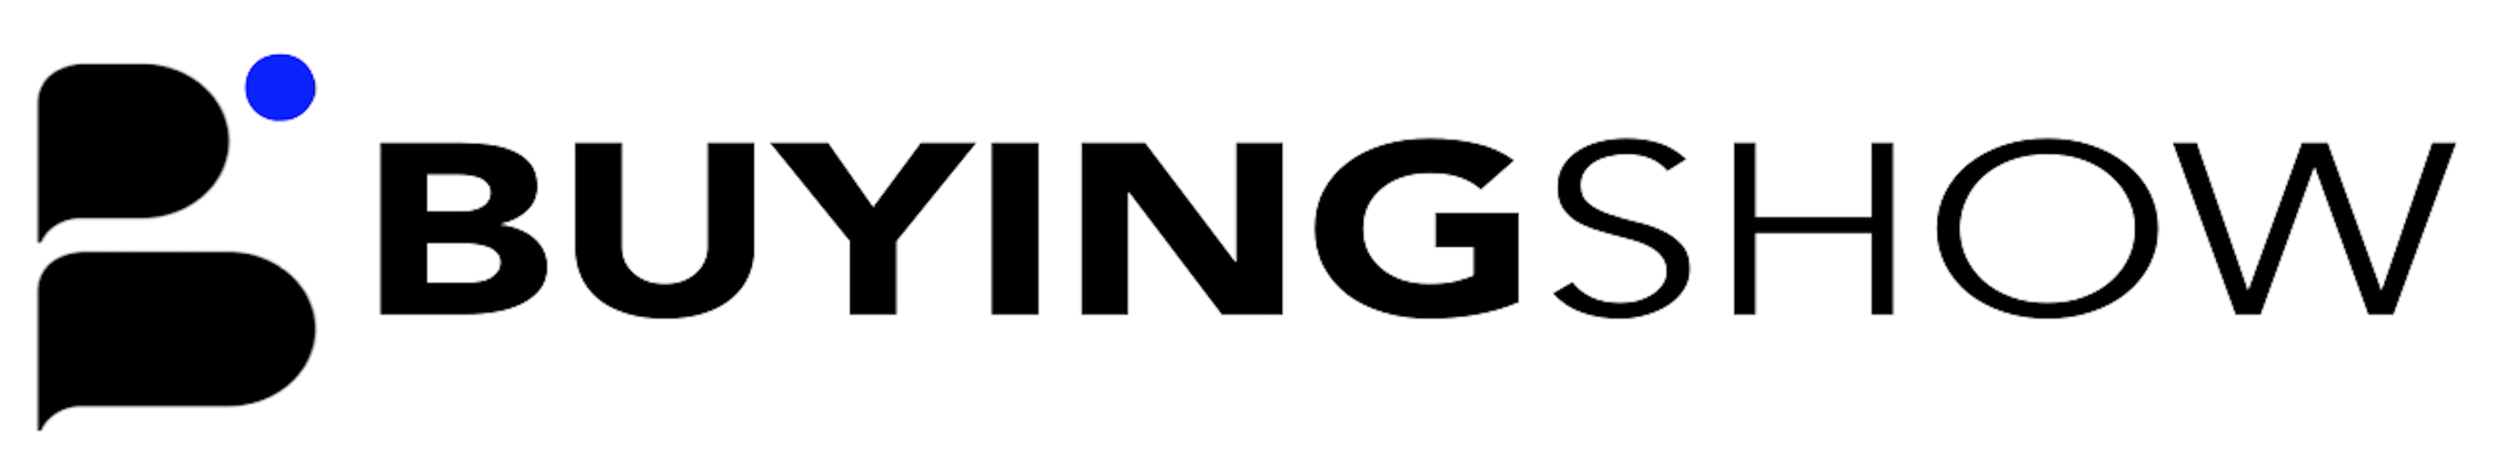 New BuyingShow logo.png